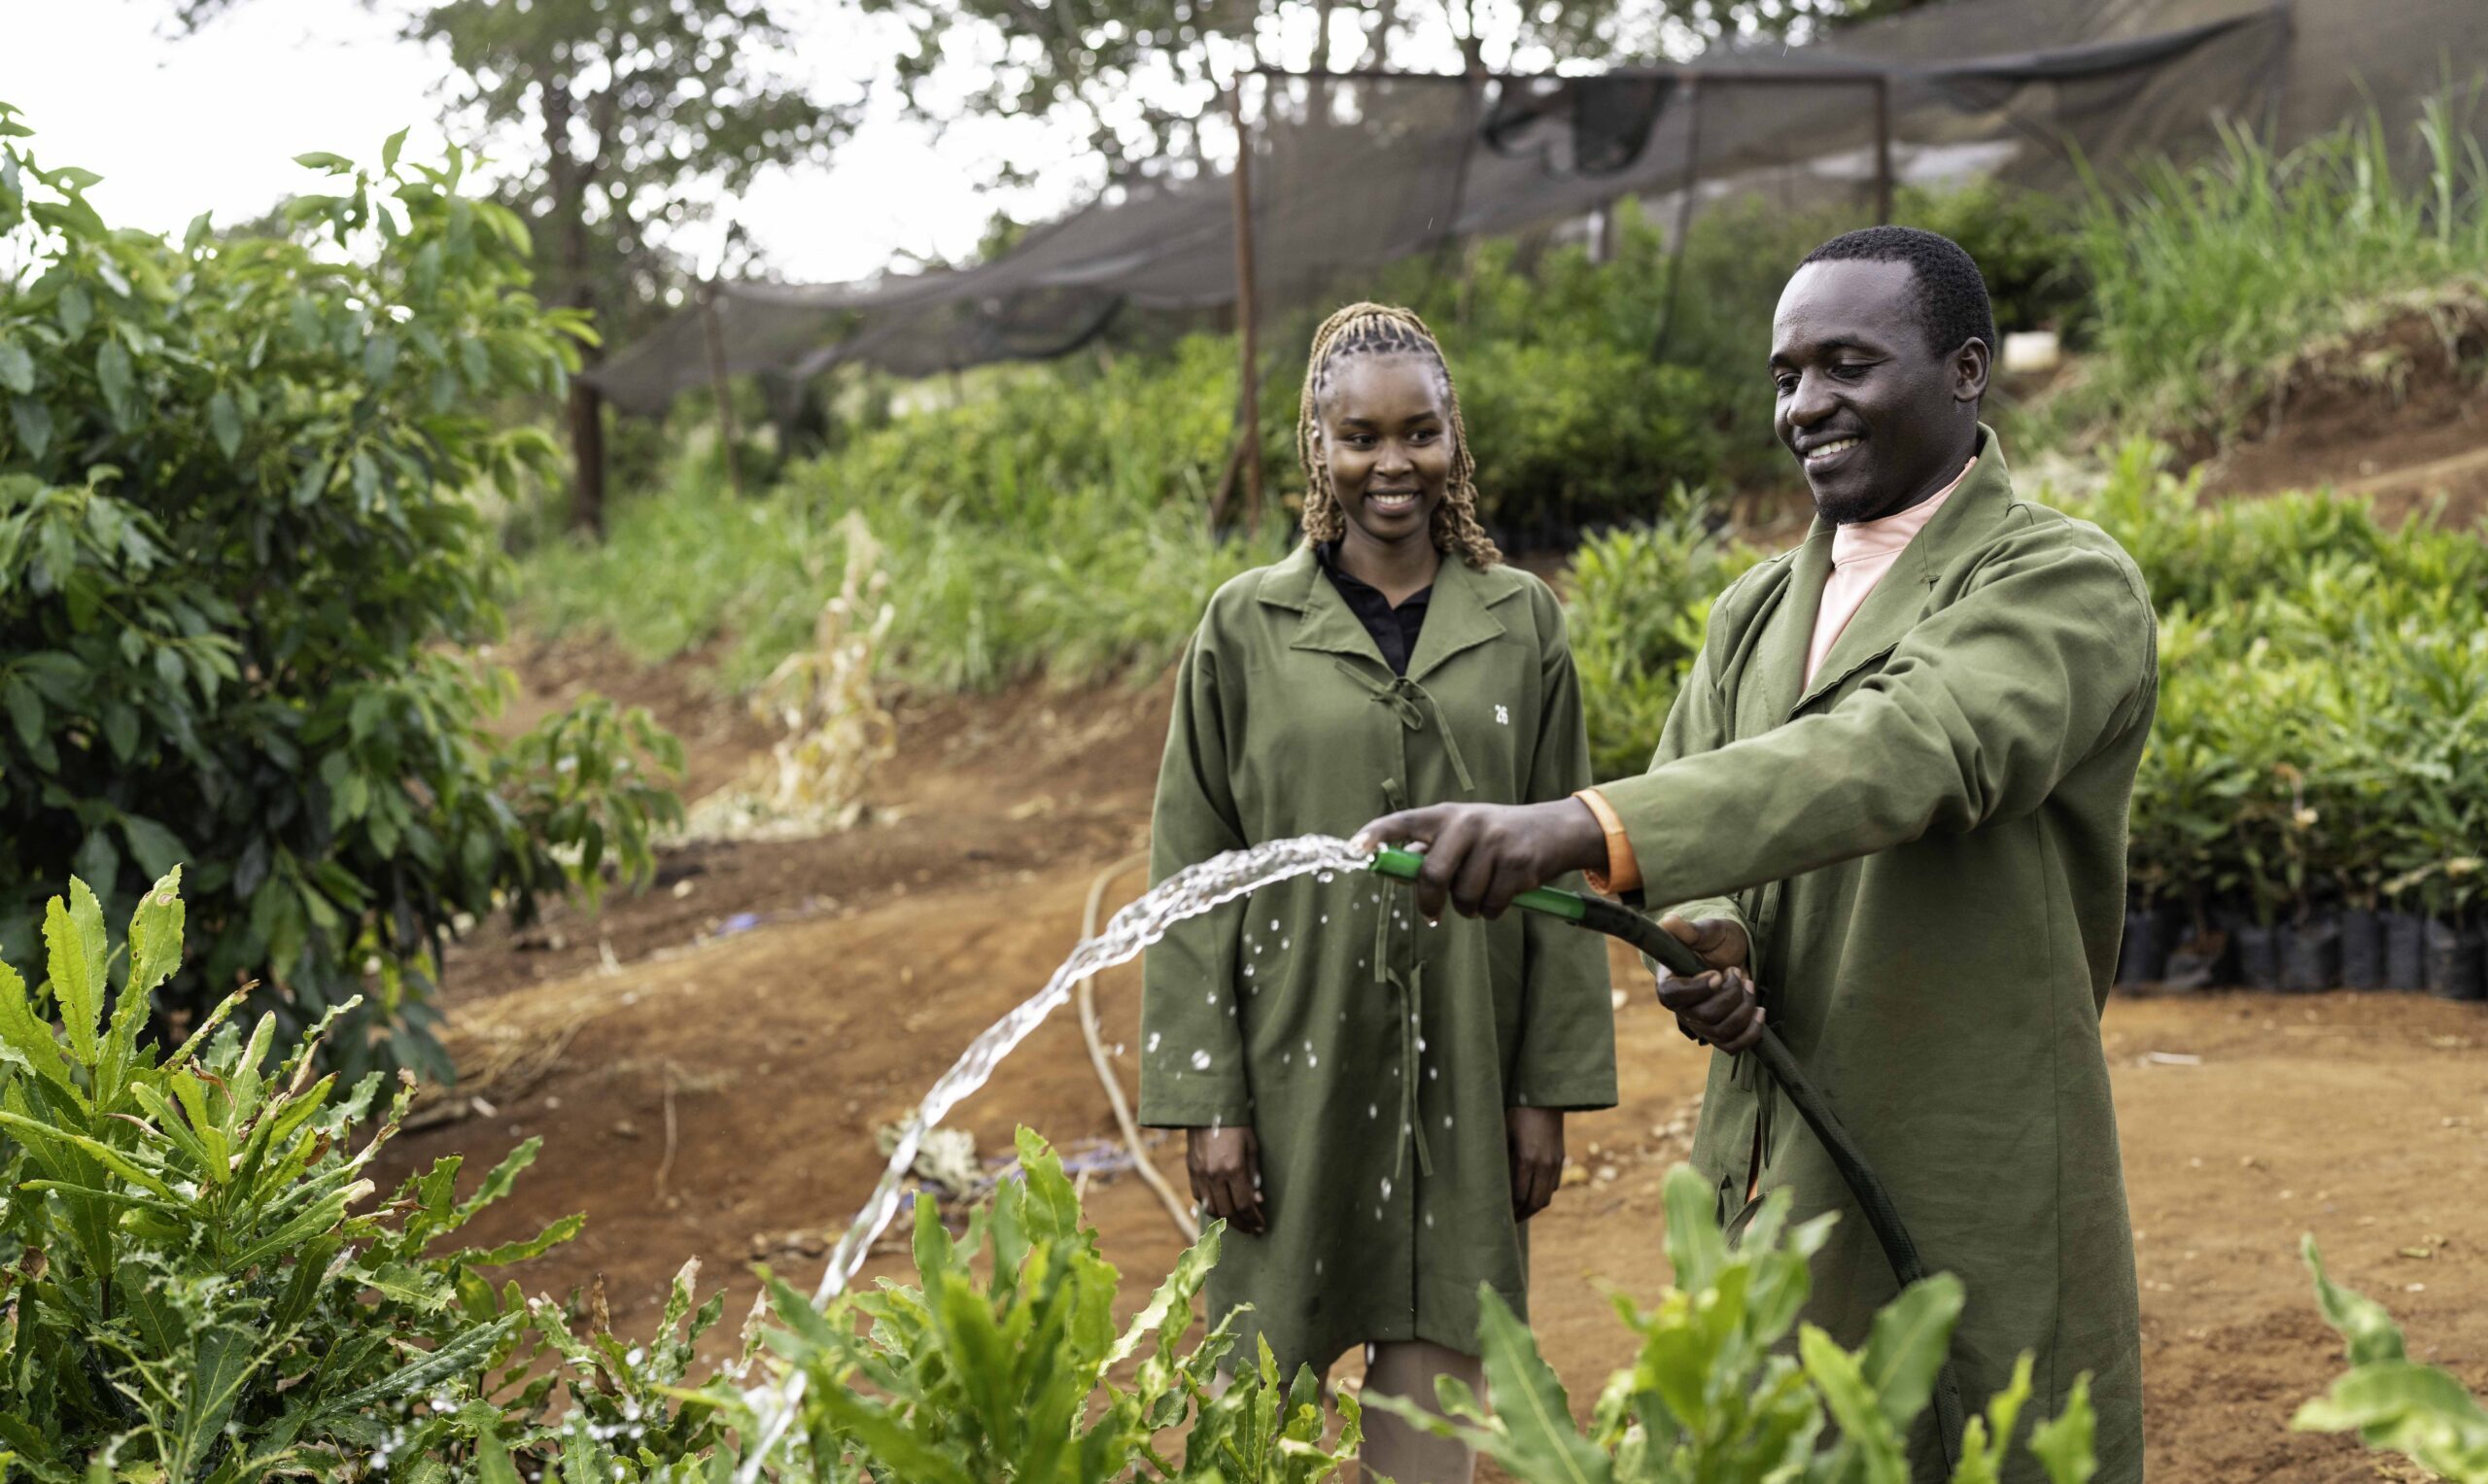 Agronomy interns Purity Kimathi and Jeremiah Nyaga use harvested rainwater to water the plants in the nursery at Jumbo Nuts Limited, a macadamia processor and Root Capital client in Kenya. Photo credit: Adam Finch/Root Capital.